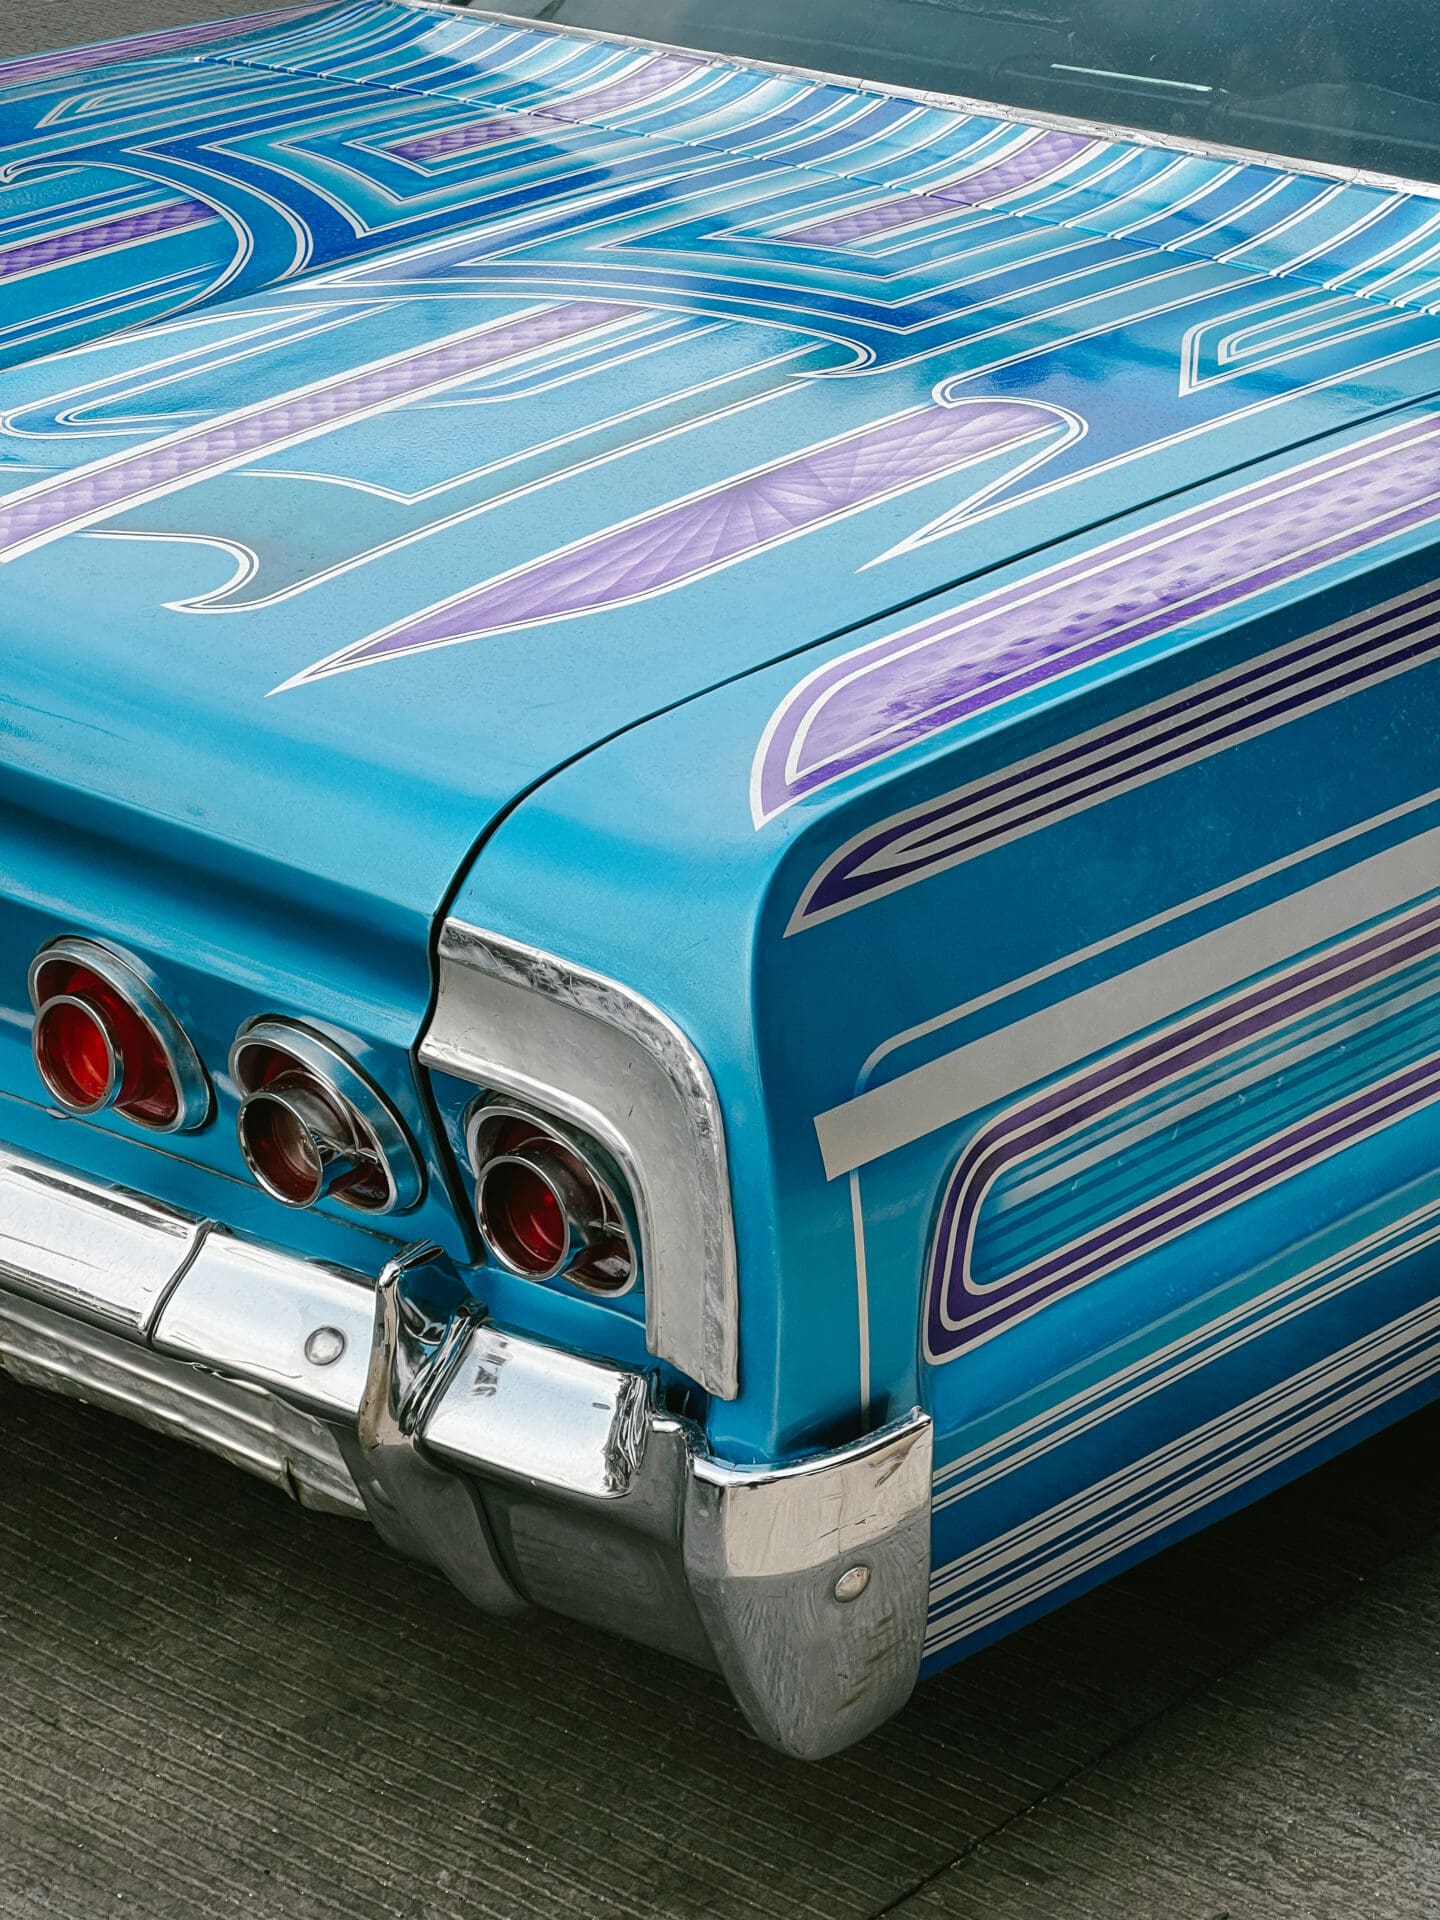 Photographer Manuel Zúñiga on Mexico City | the rear corner and boot of a classic car, with blue and purple patterns.